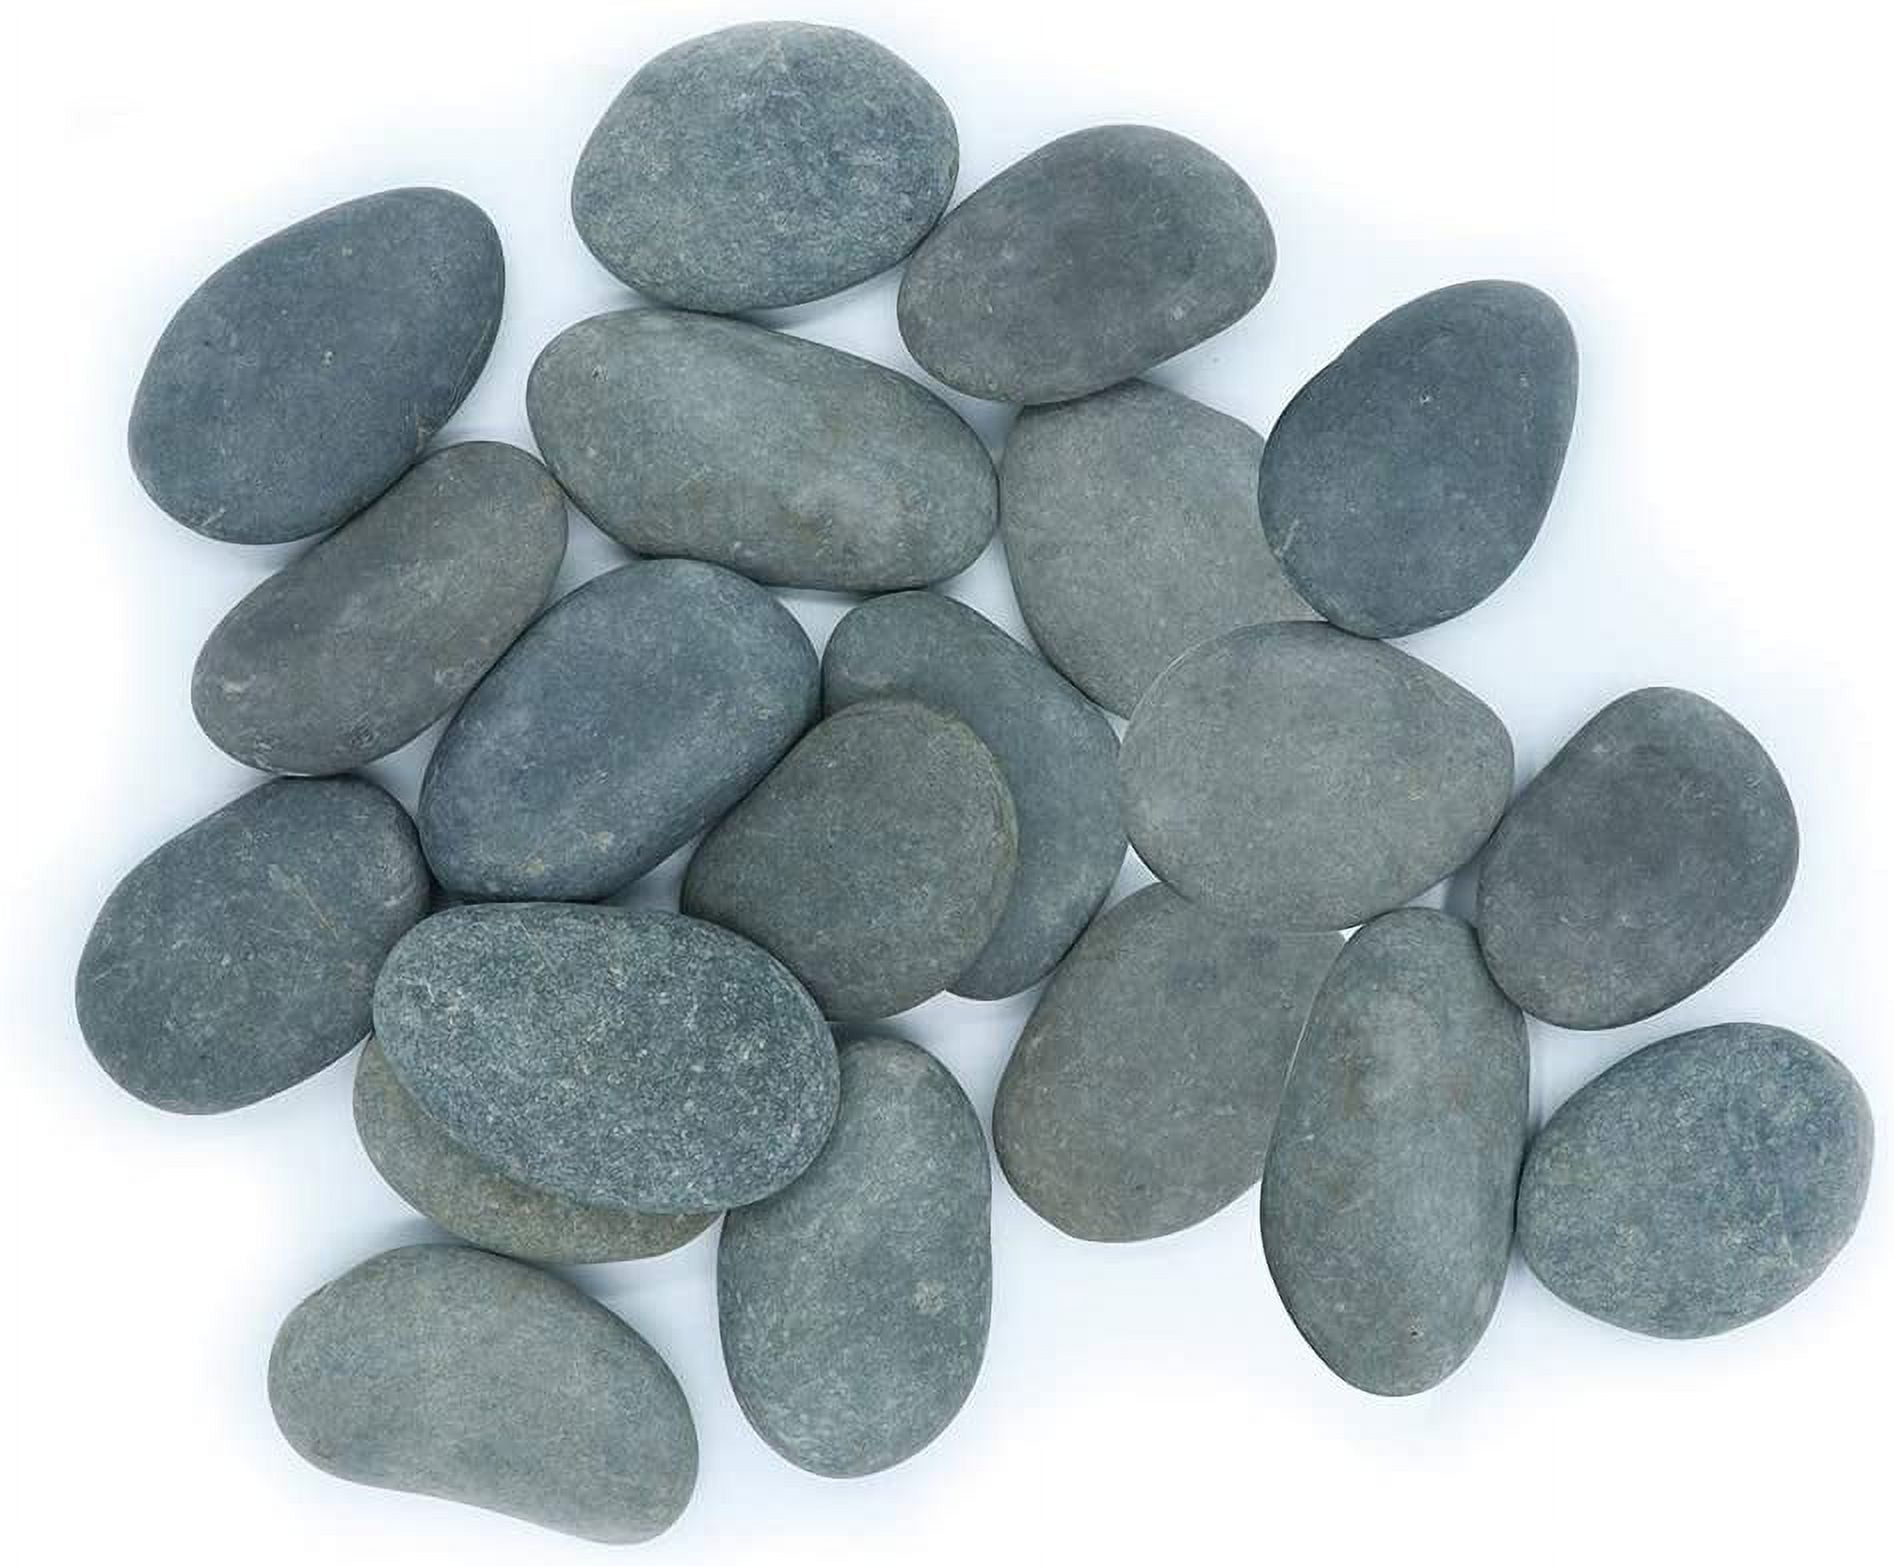 10Pcs River Rocks for Painting Painting Rocks Large 3.9-4.7In